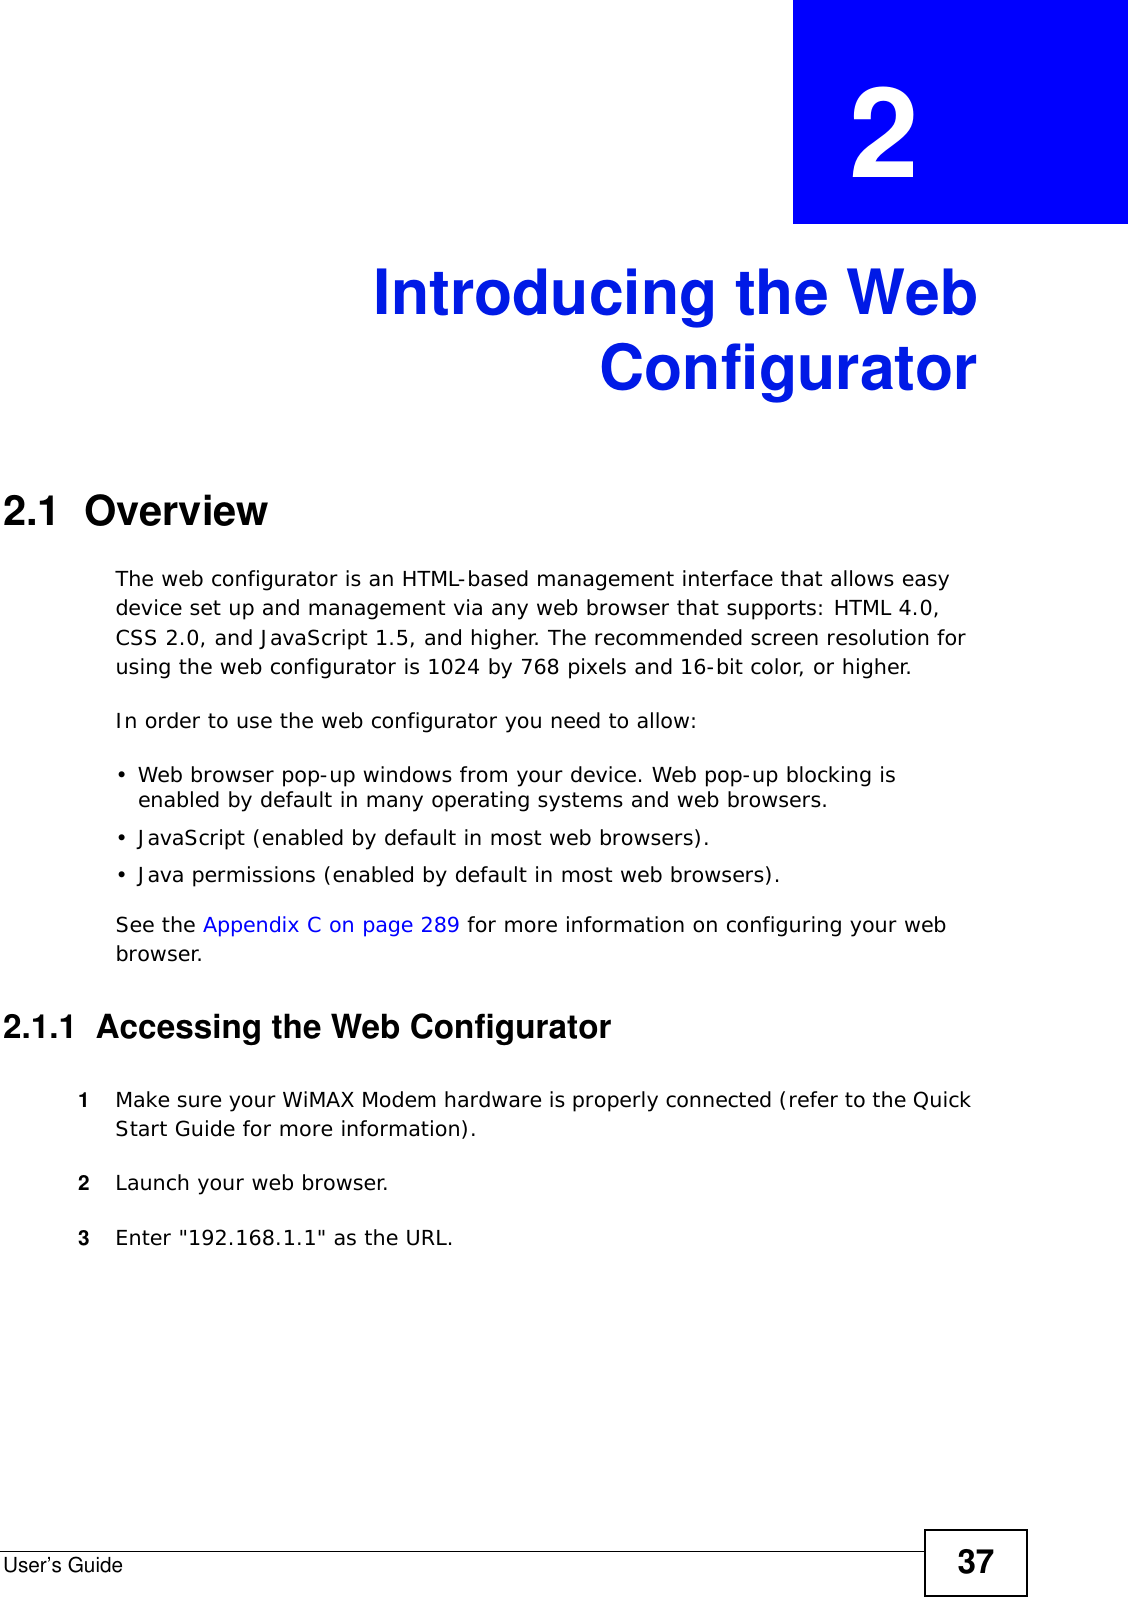 User’s Guide 37CHAPTER  2 Introducing the WebConfigurator2.1  OverviewThe web configurator is an HTML-based management interface that allows easy device set up and management via any web browser that supports: HTML 4.0, CSS 2.0, and JavaScript 1.5, and higher. The recommended screen resolution for using the web configurator is 1024 by 768 pixels and 16-bit color, or higher.In order to use the web configurator you need to allow:• Web browser pop-up windows from your device. Web pop-up blocking is enabled by default in many operating systems and web browsers.• JavaScript (enabled by default in most web browsers).• Java permissions (enabled by default in most web browsers).See the Appendix C on page 289 for more information on configuring your web browser.2.1.1  Accessing the Web Configurator1Make sure your WiMAX Modem hardware is properly connected (refer to the Quick Start Guide for more information).2Launch your web browser.3Enter &quot;192.168.1.1&quot; as the URL.